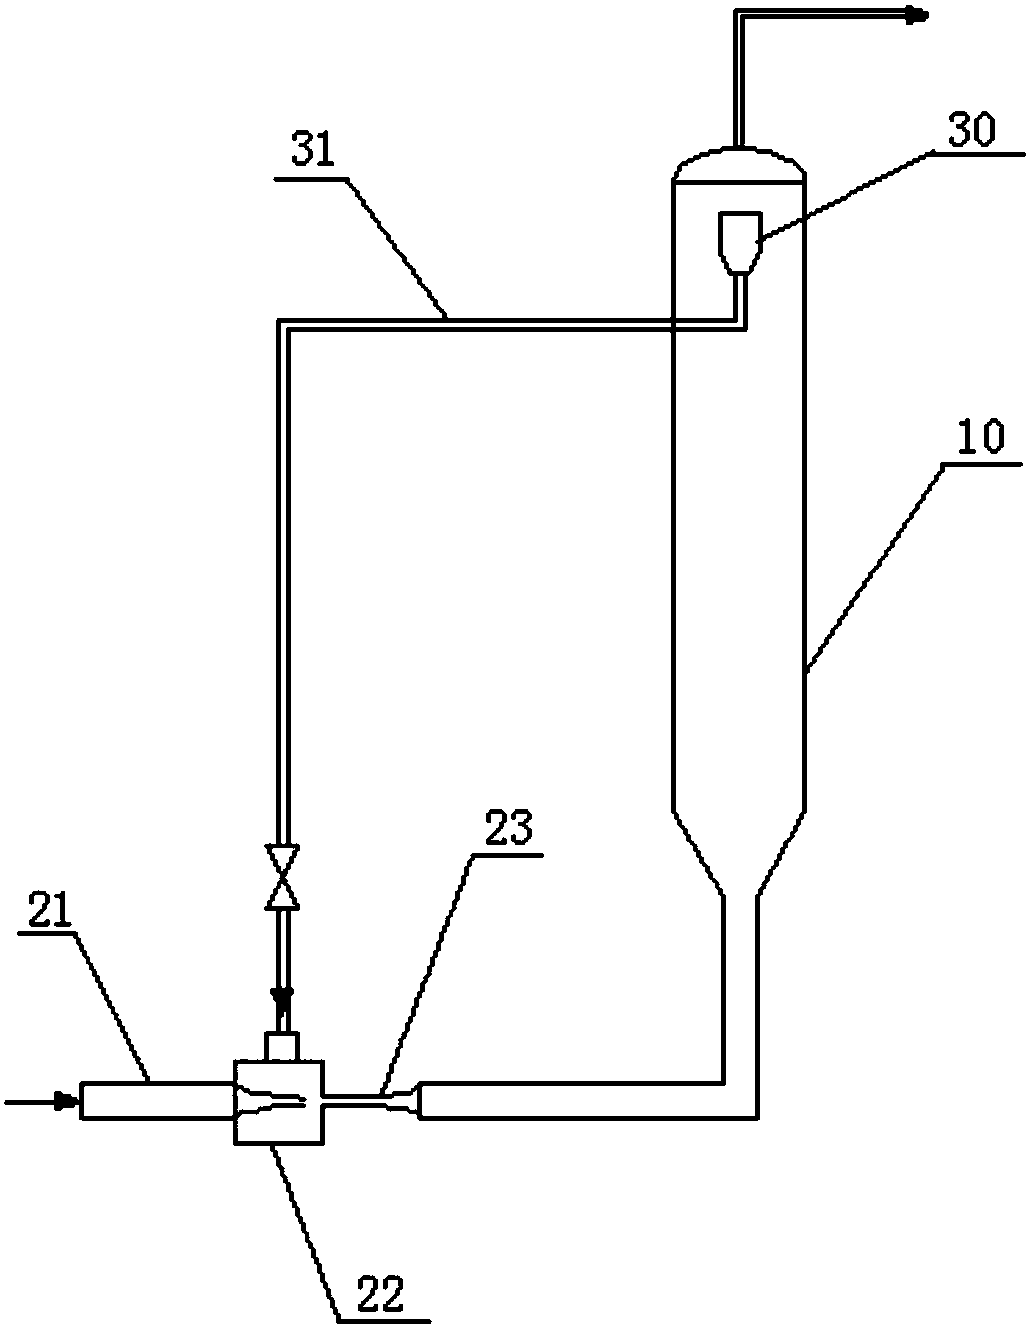 Suspended bed reactor with liquid phase self-circulation function